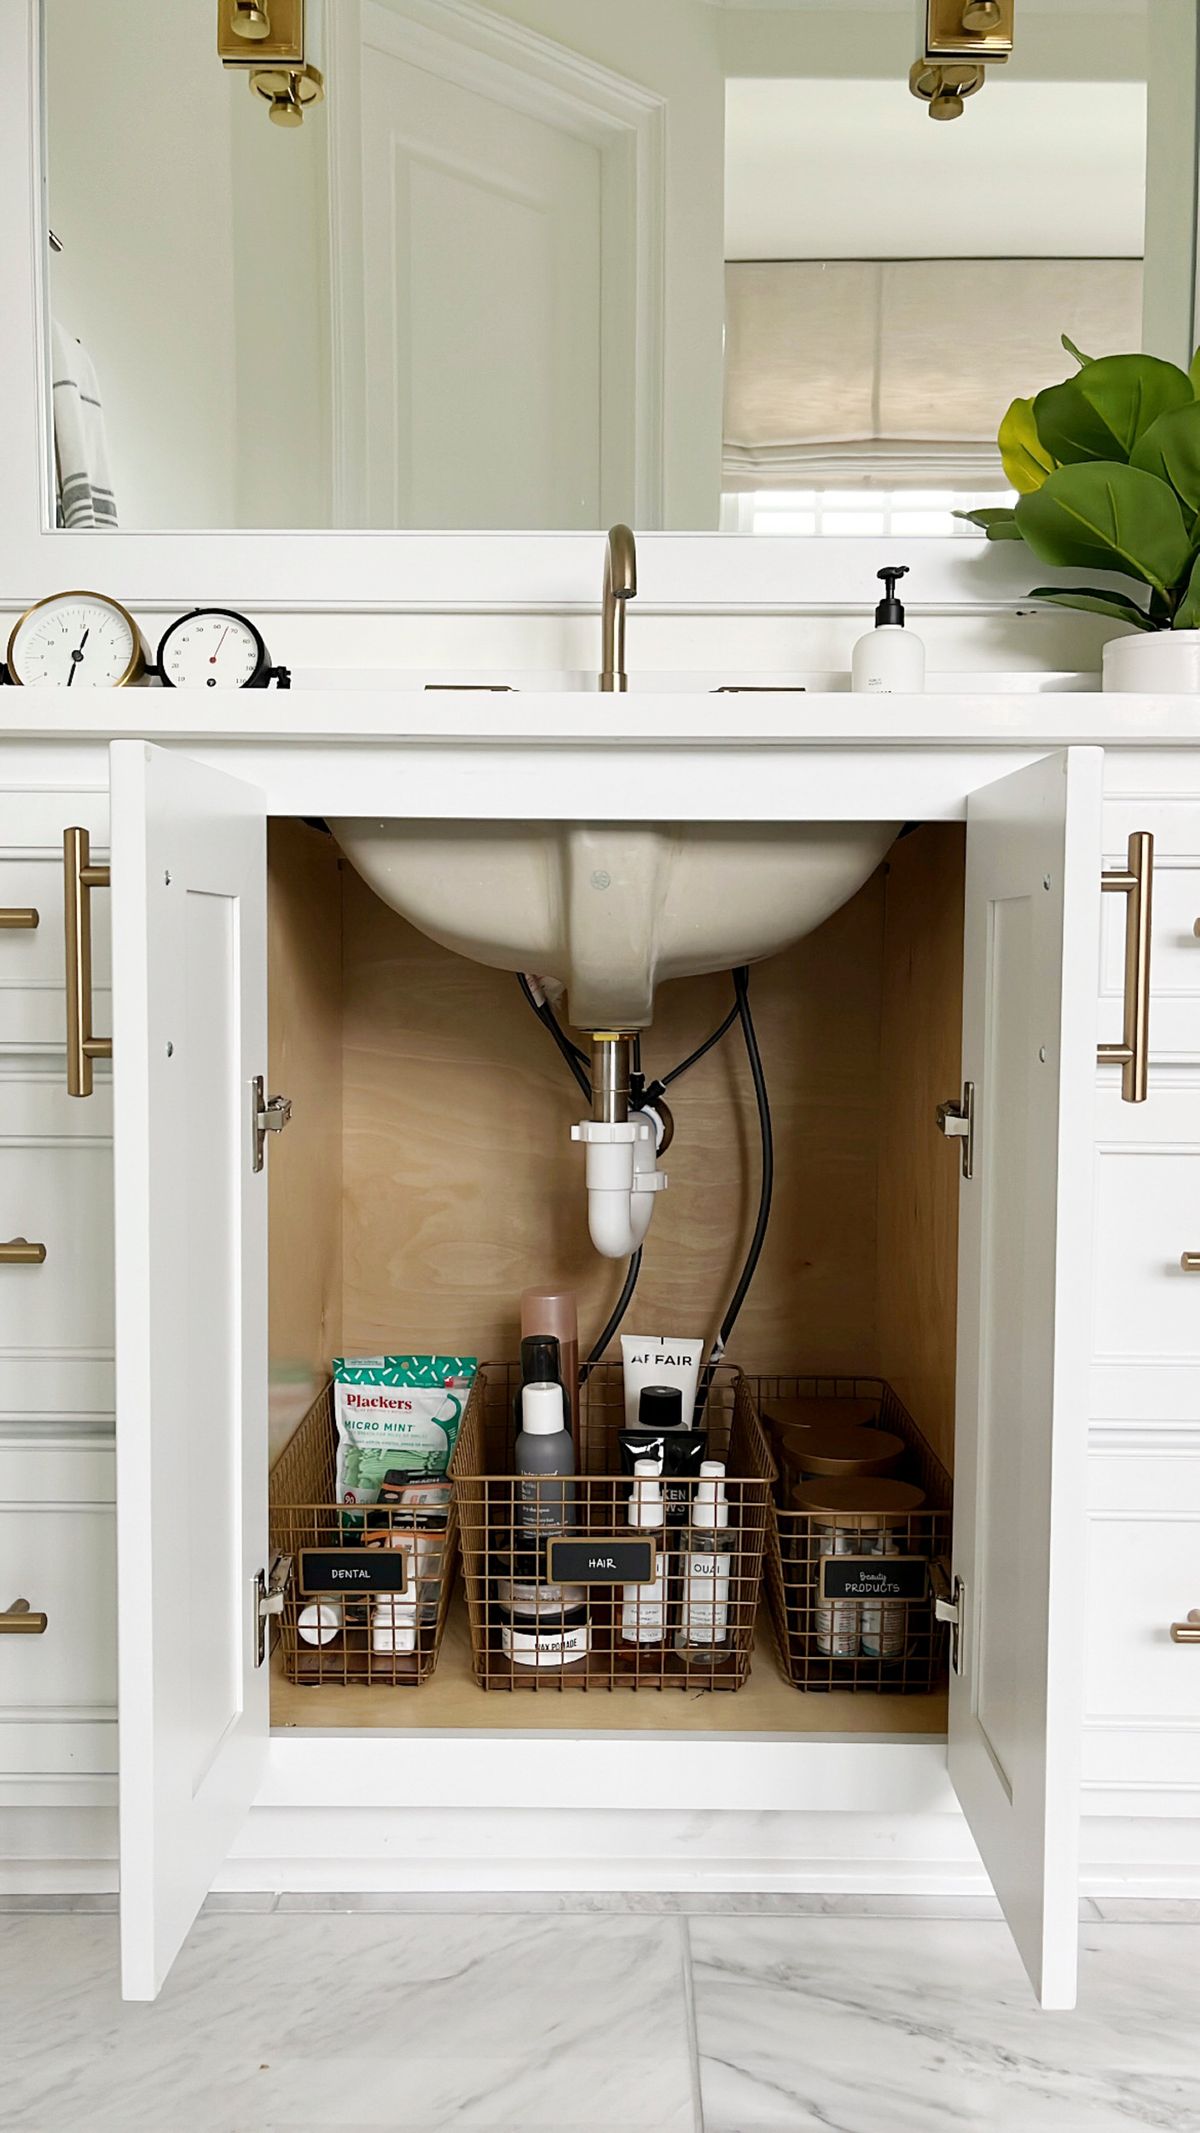 How to Make the Most of Under-Sink Bathroom Storage